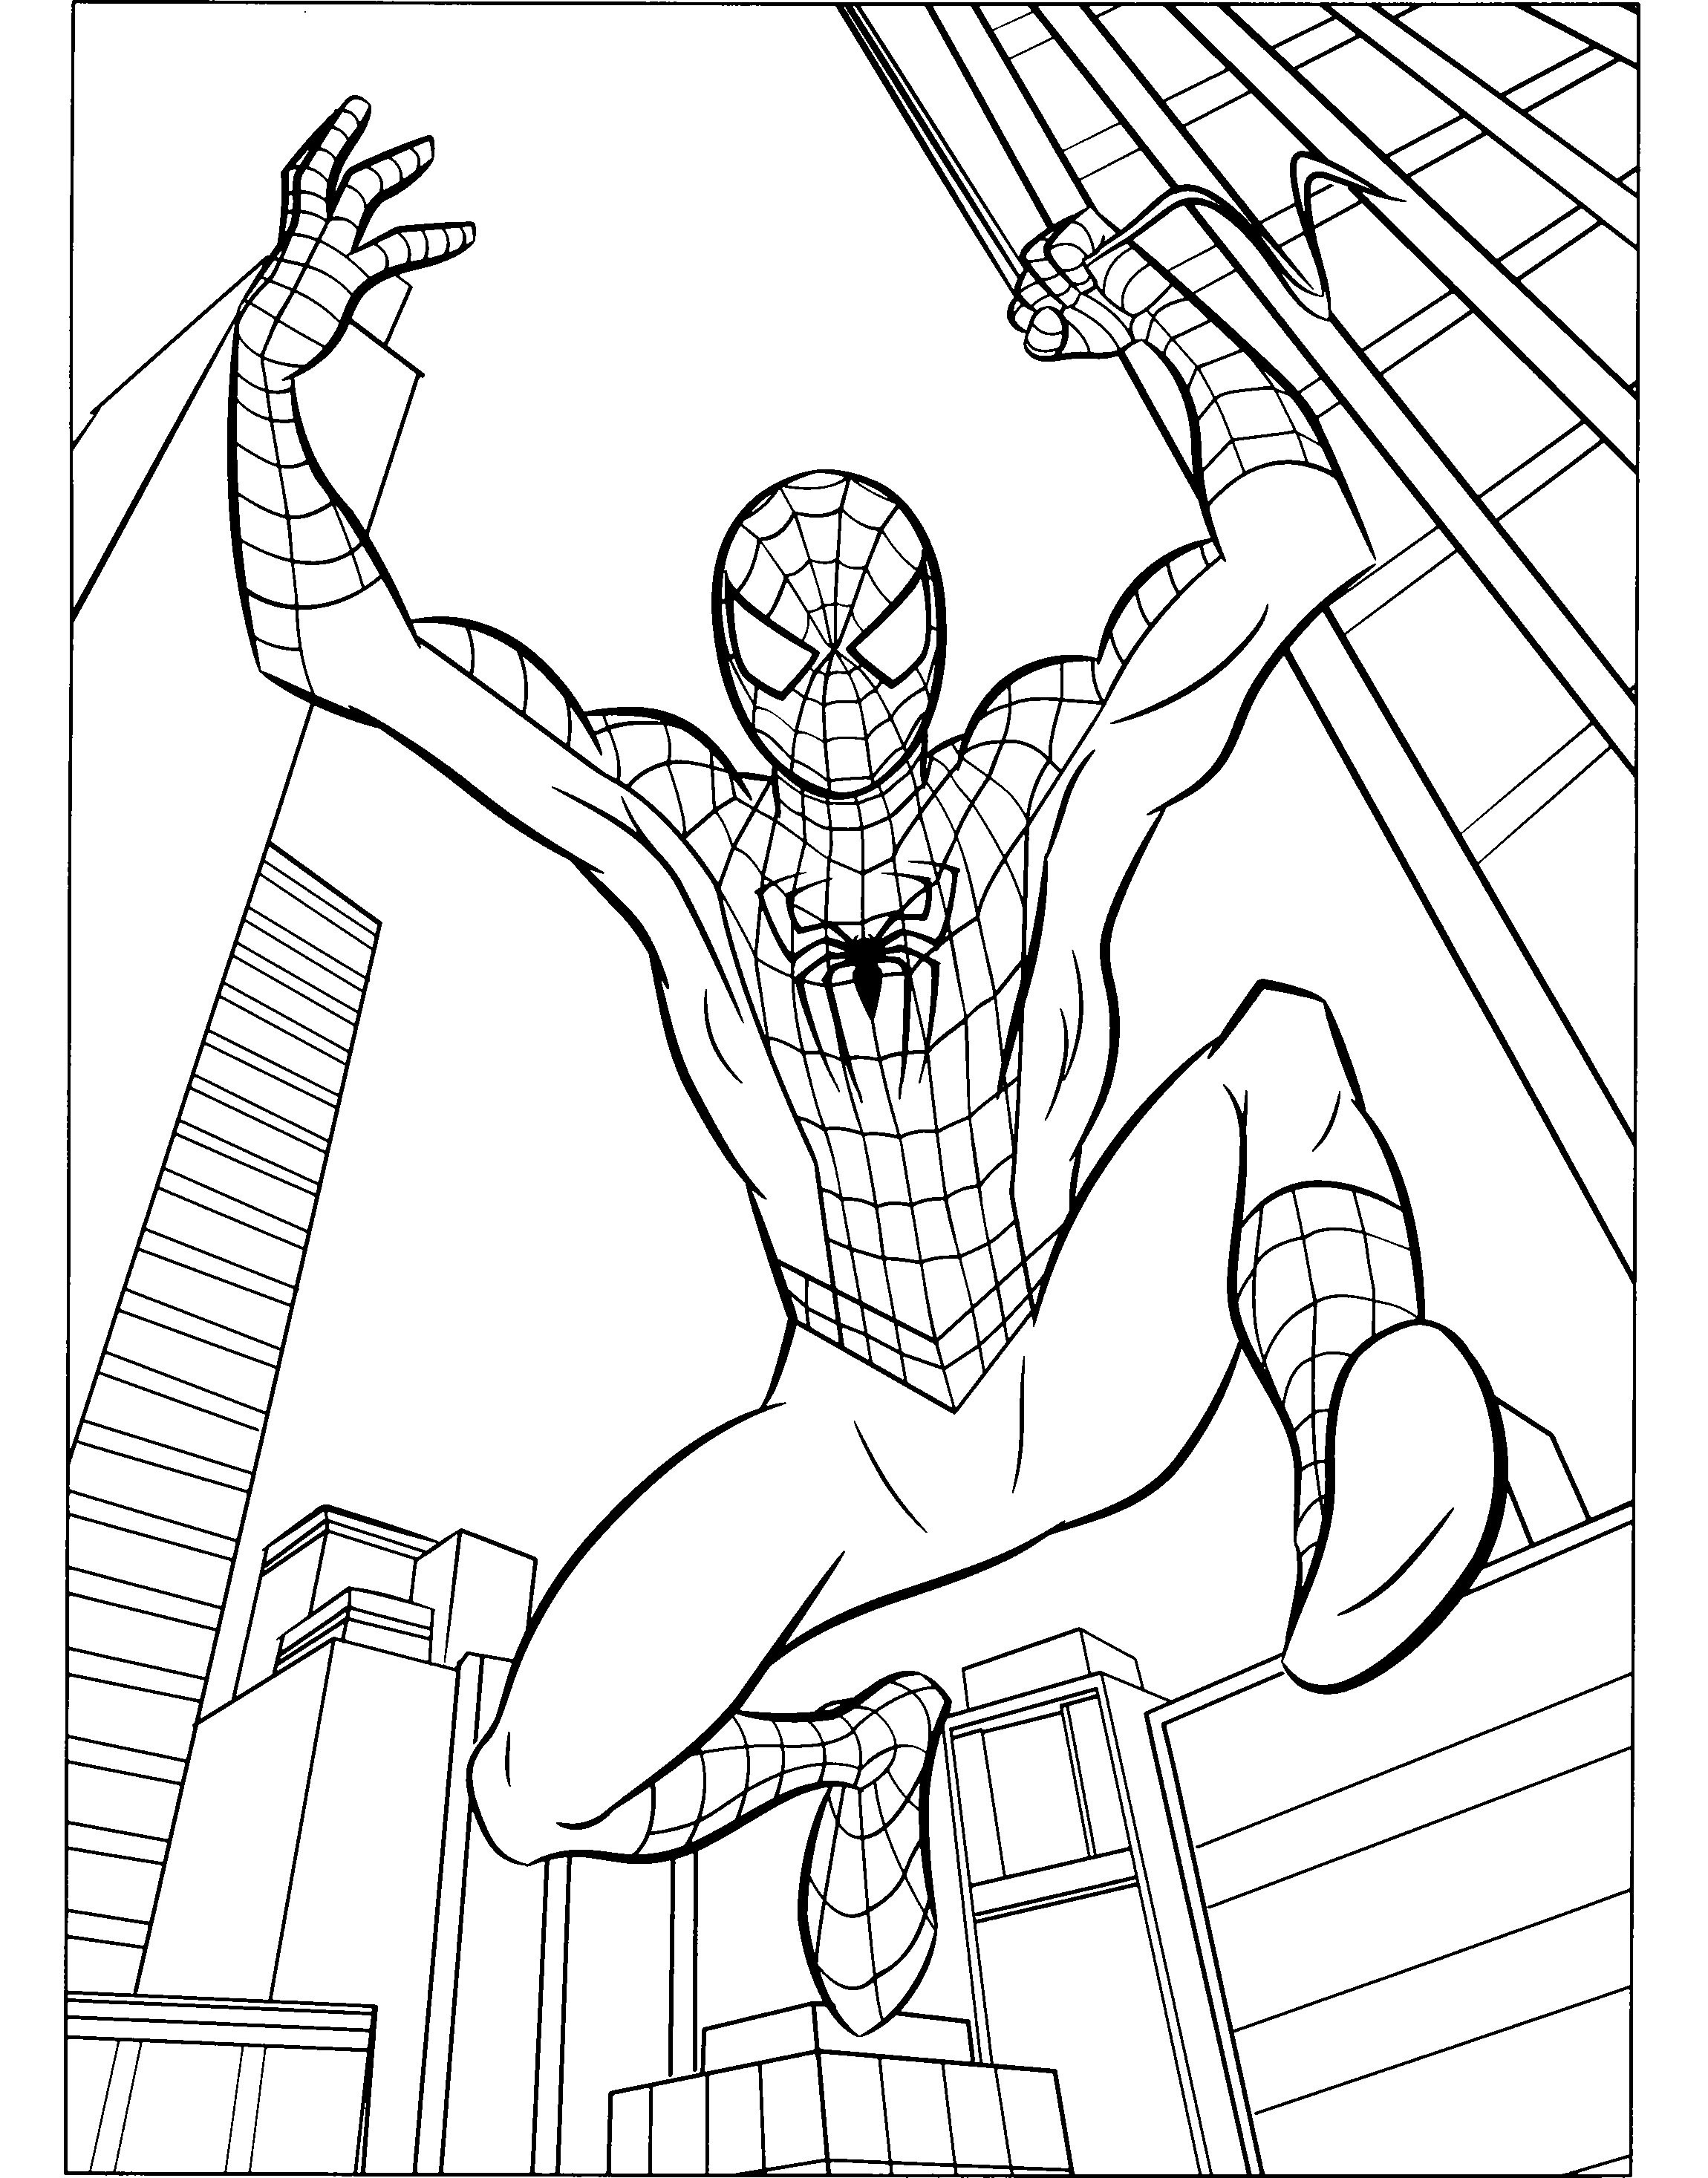 Coloring Sheets For Boys Spiderman
 Spiderman Coloring Pages Dr Odd